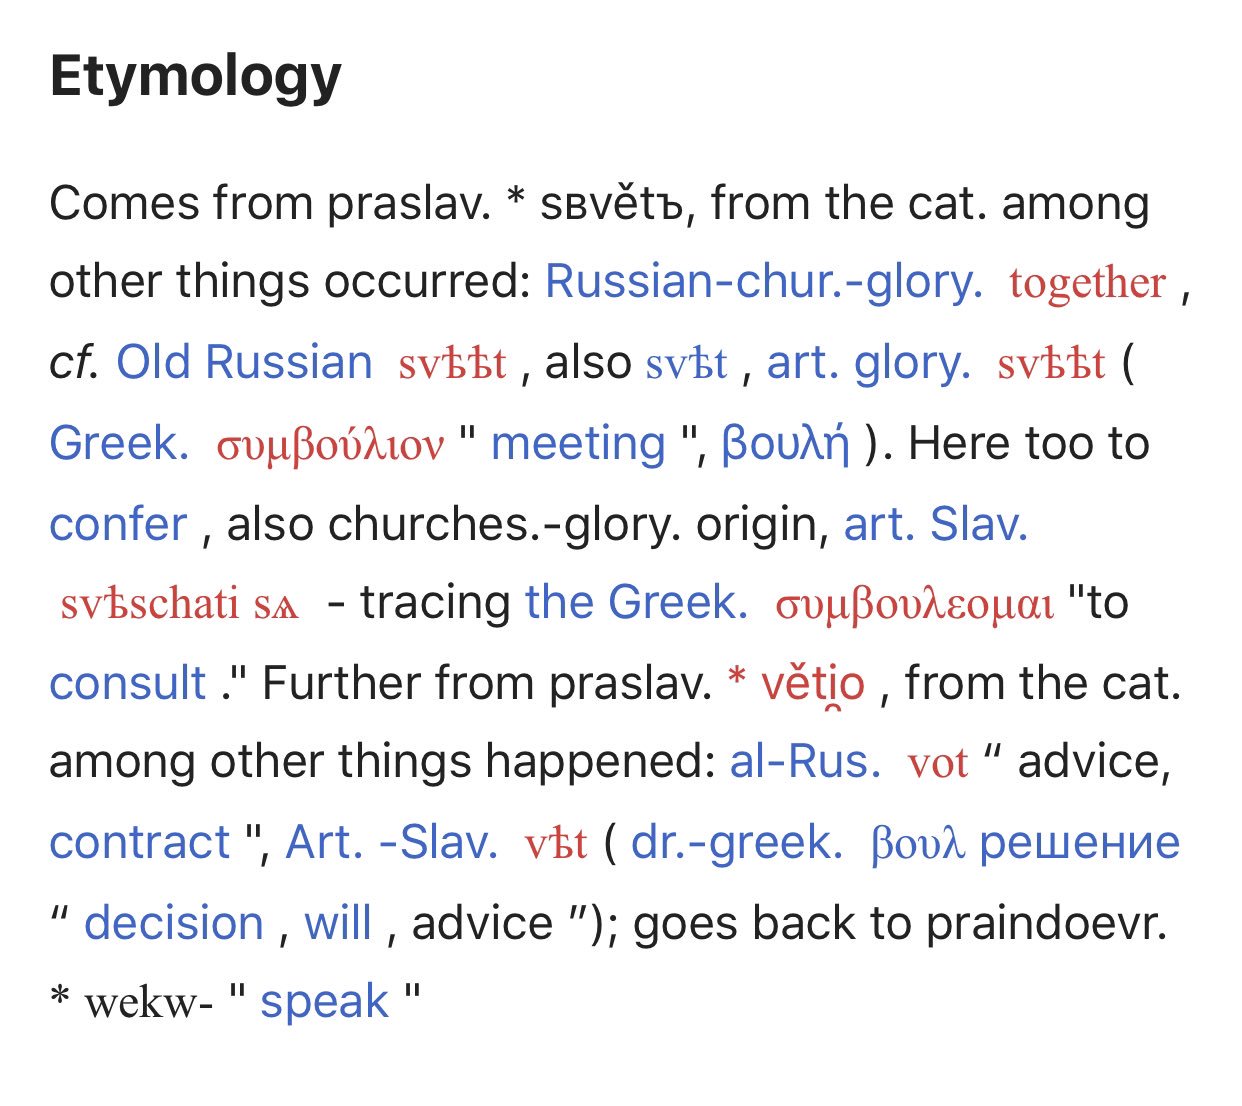 kevin simler on X: "@alexbakus Not sure what I'm missing here. If we take  the Russian language wiki as ground truth, what's wrong with the etymology  given on the English language wiki?